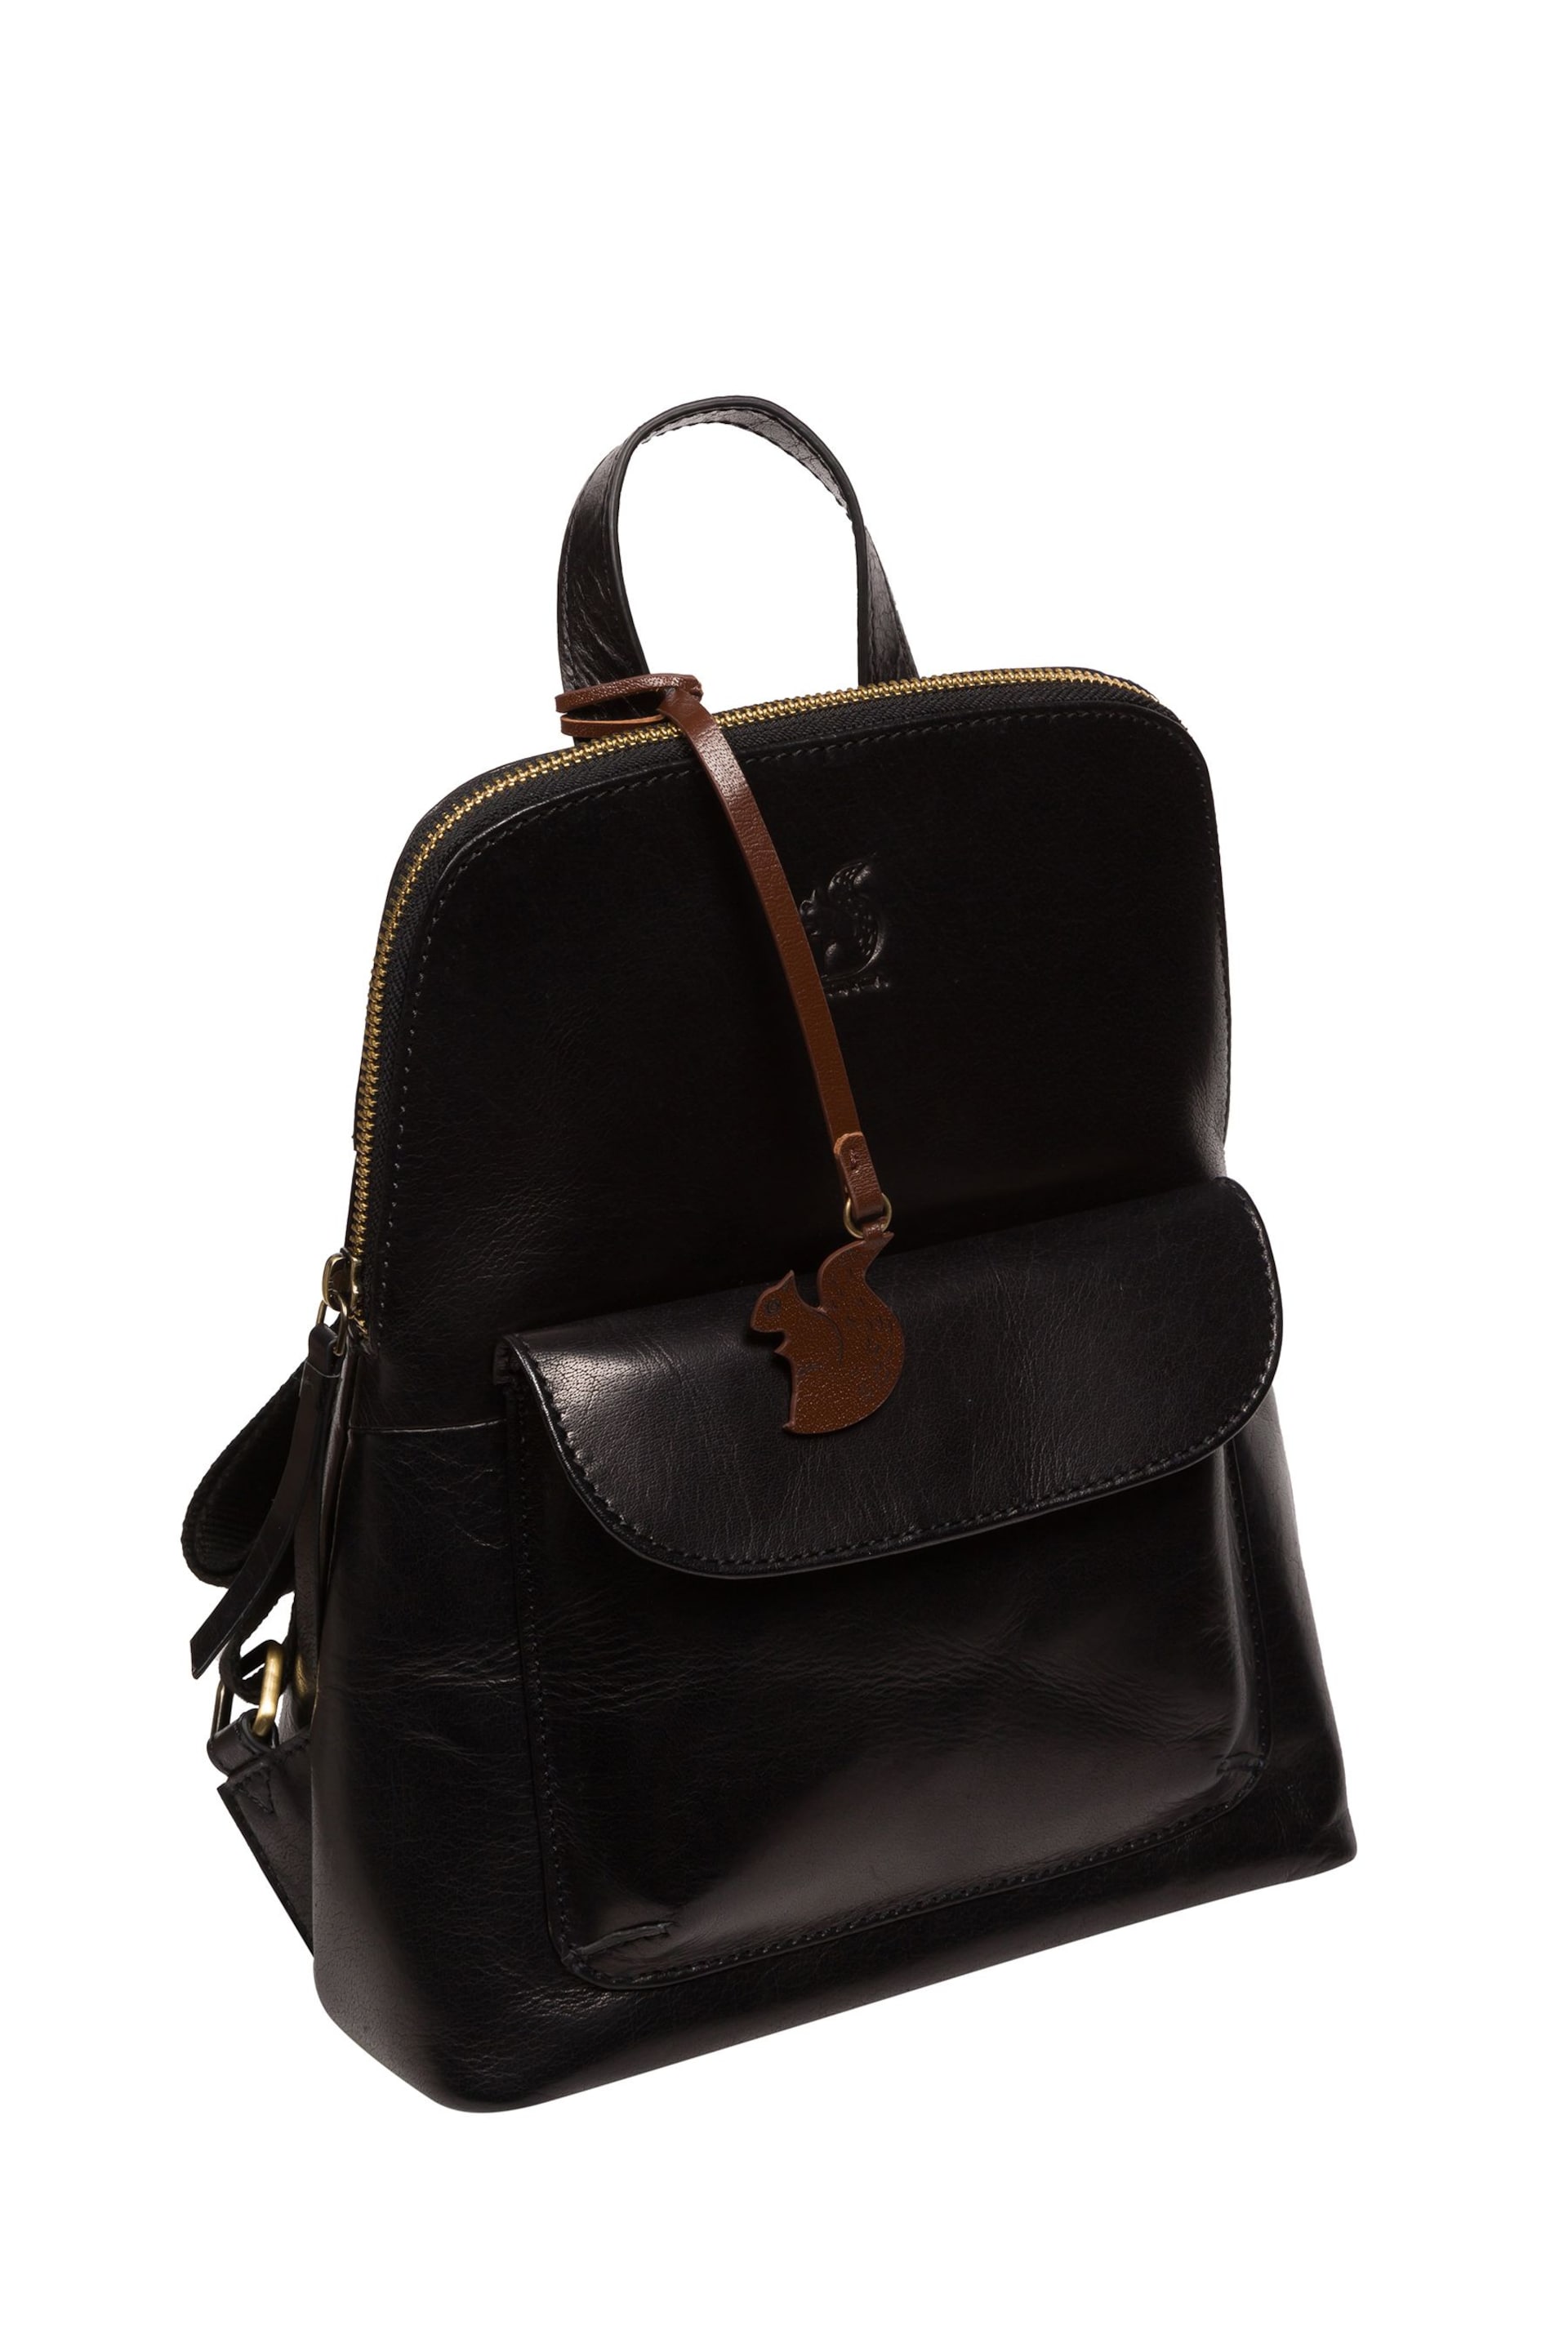 Conkca 'Kerrie' Leather Backpack - Image 5 of 6